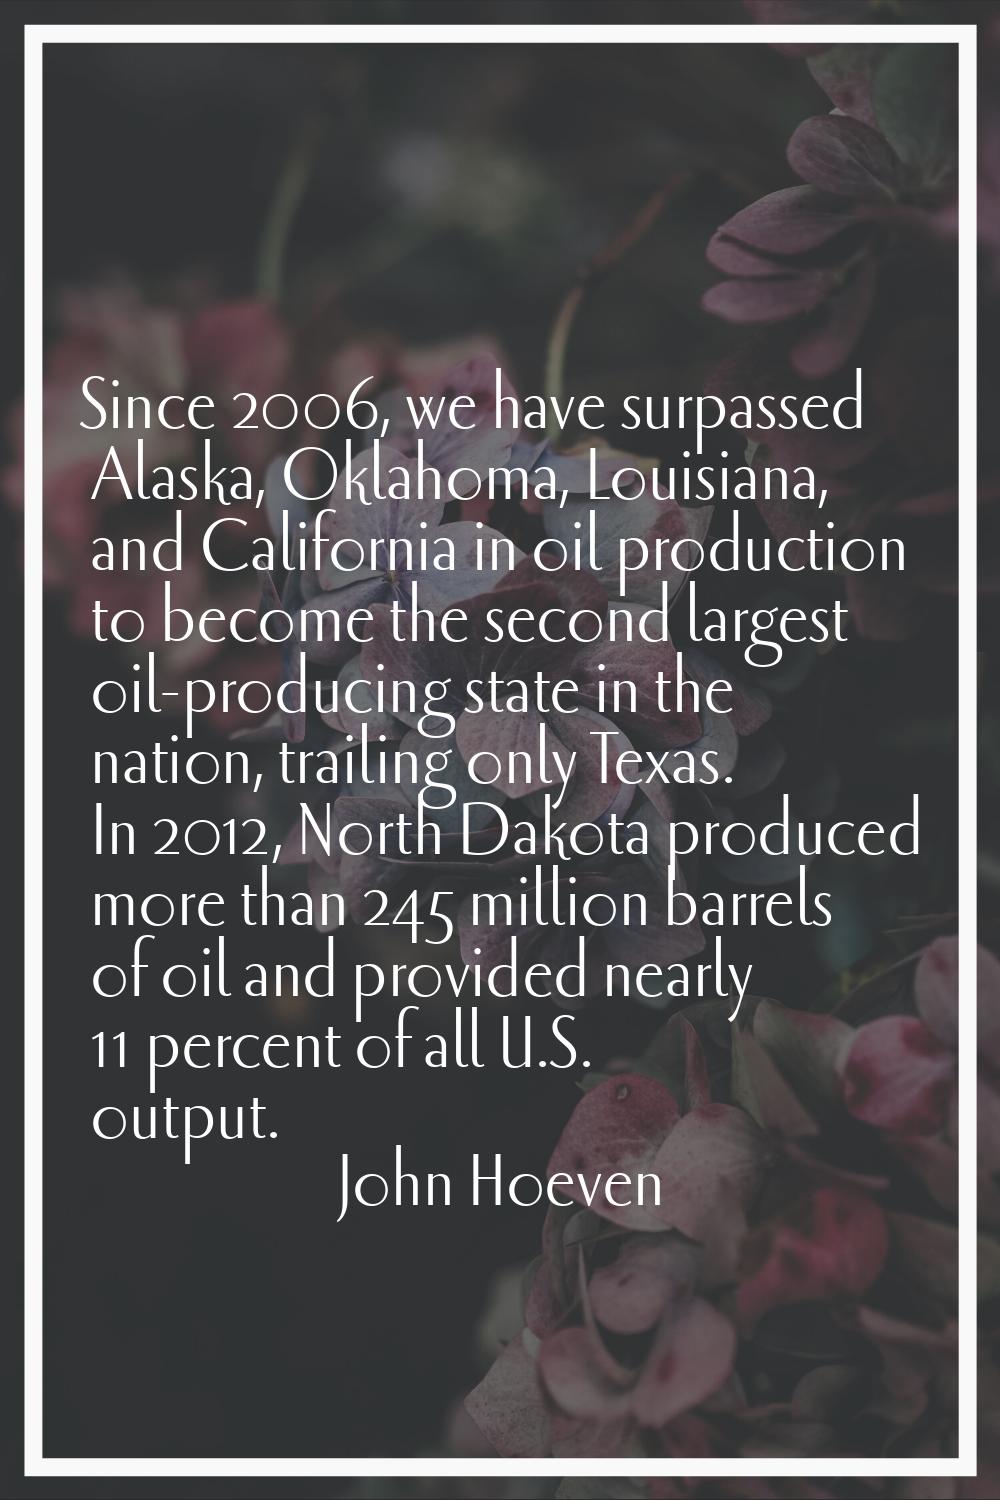 Since 2006, we have surpassed Alaska, Oklahoma, Louisiana, and California in oil production to beco